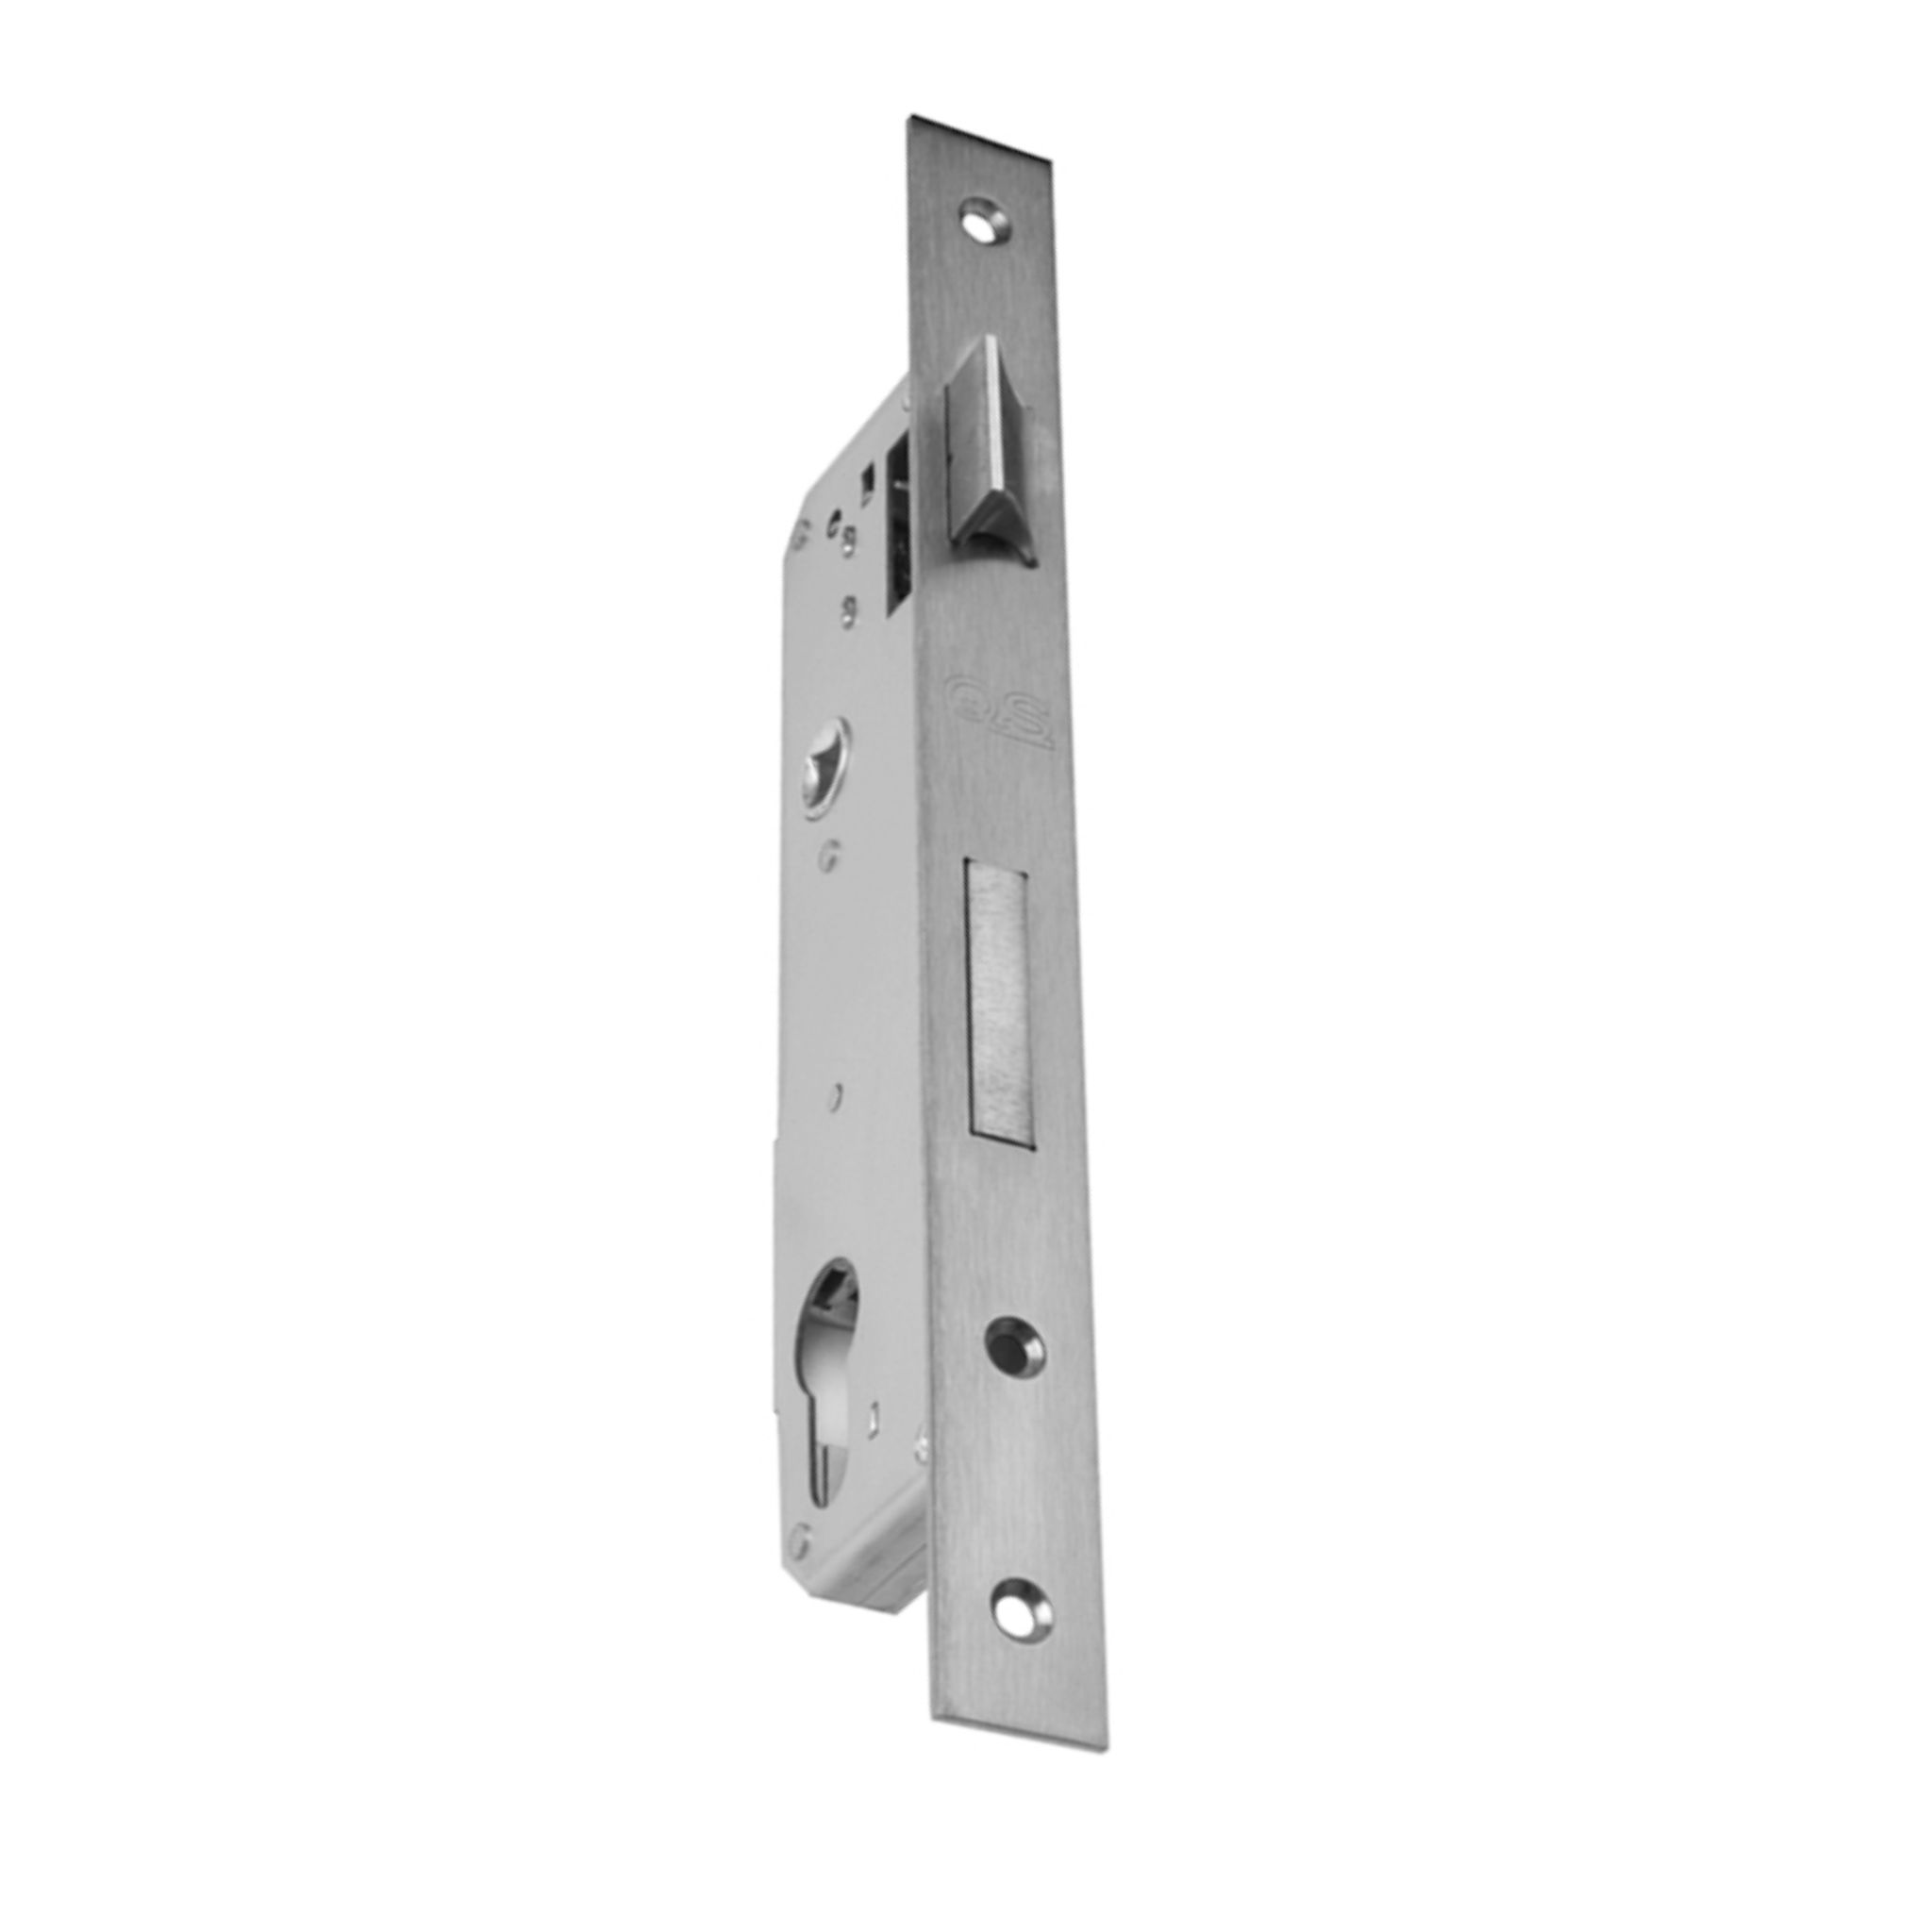 QS8525/1SS, Narrow Style, Latch & Deadbolt Lock, Euro Cylinder, Excluding Cylinder, 25mm (Backset), 85mm (ctc), Stainless Steel, QS